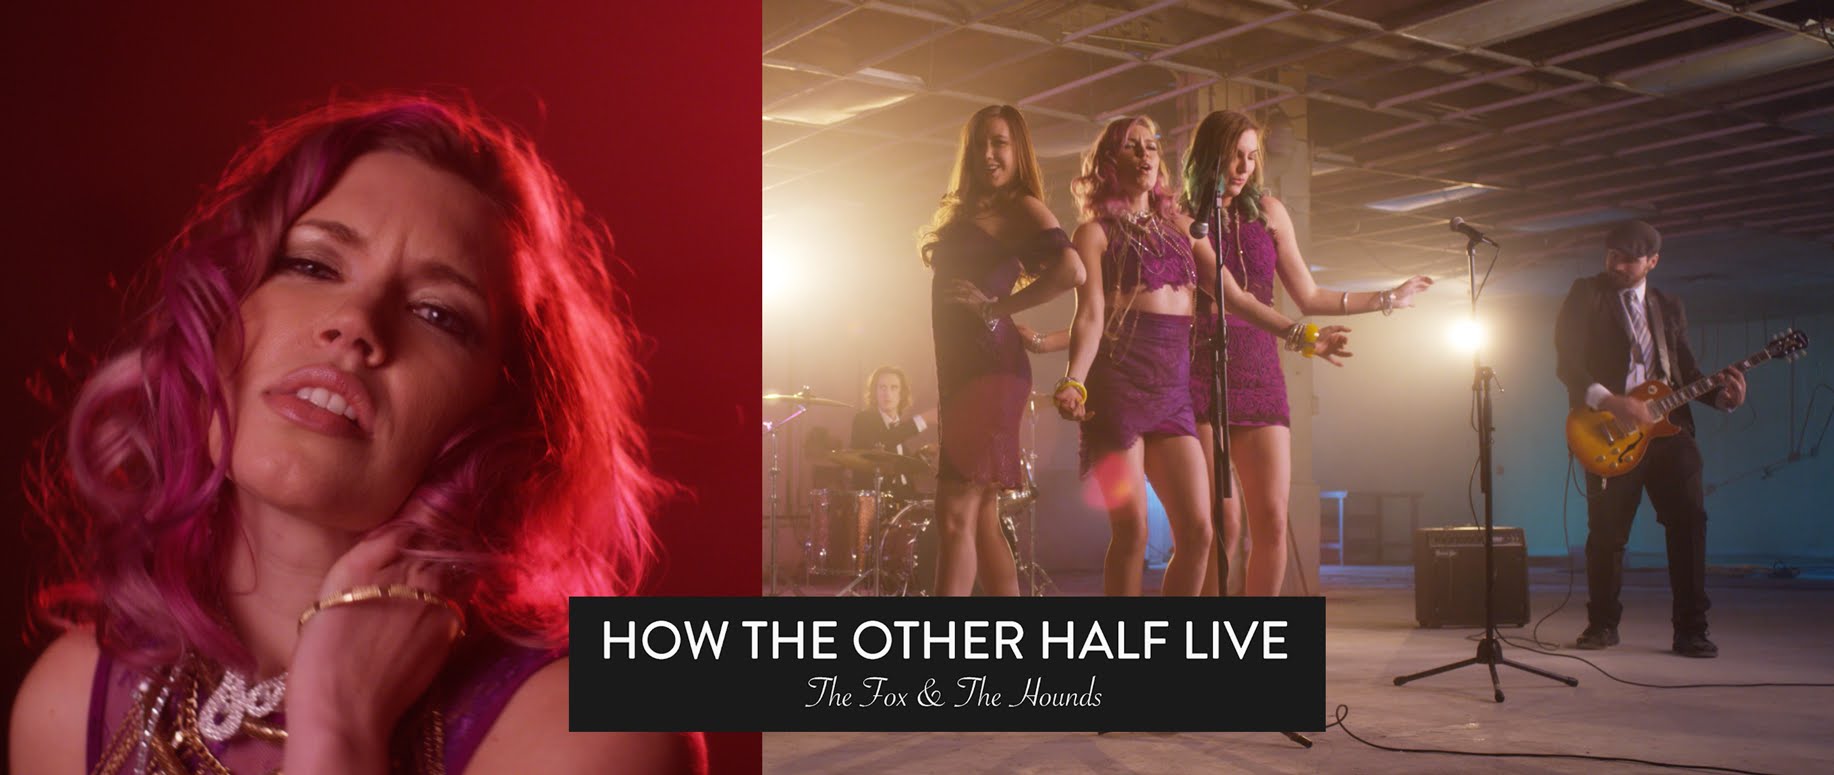 The Fox & The Hounds – How the Other Half Live